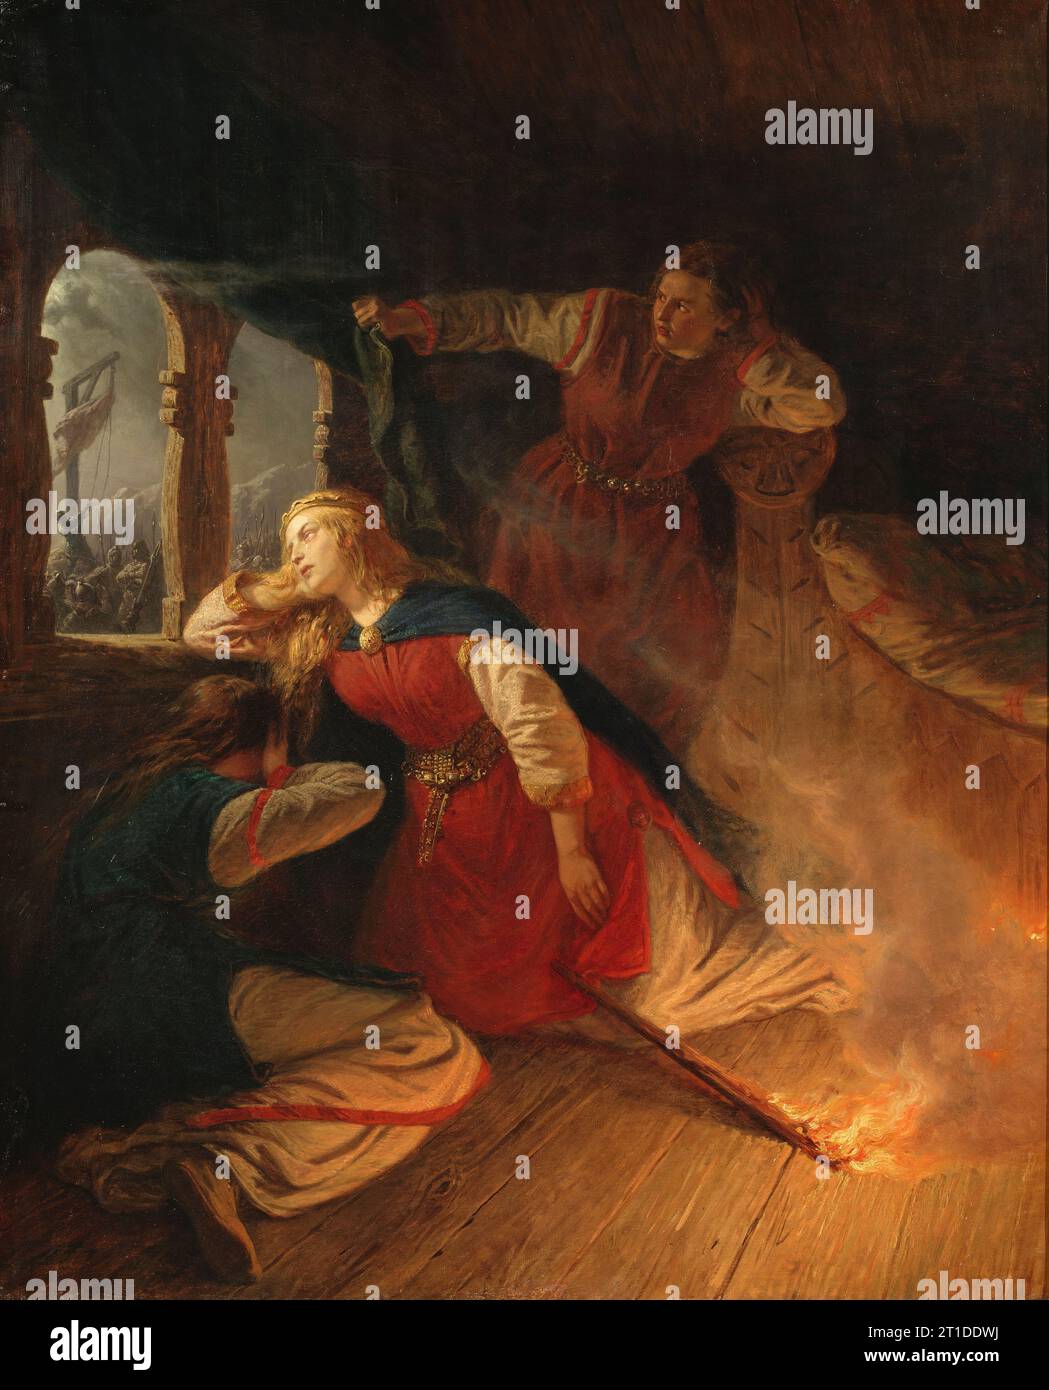 Signe Seeks Death in the Flames of Her Bower, mid-late 19th century. The story of Signy from Old Norse mythology is a classic narrative on the theme of love thwarted. Signy and Hagbard fall in love with each other but they belong to conflicting families. When Hagbard secretly contacts Signy he is condemned to death. Here we can see how Hagbard, prior to his execution, has raised his cloak on the gallows to indicate Signy's faithfulness. Signy sees the cloak and believes that Hagbard has been hanged. She commits suicide by setting fire to her hut. Stock Photo